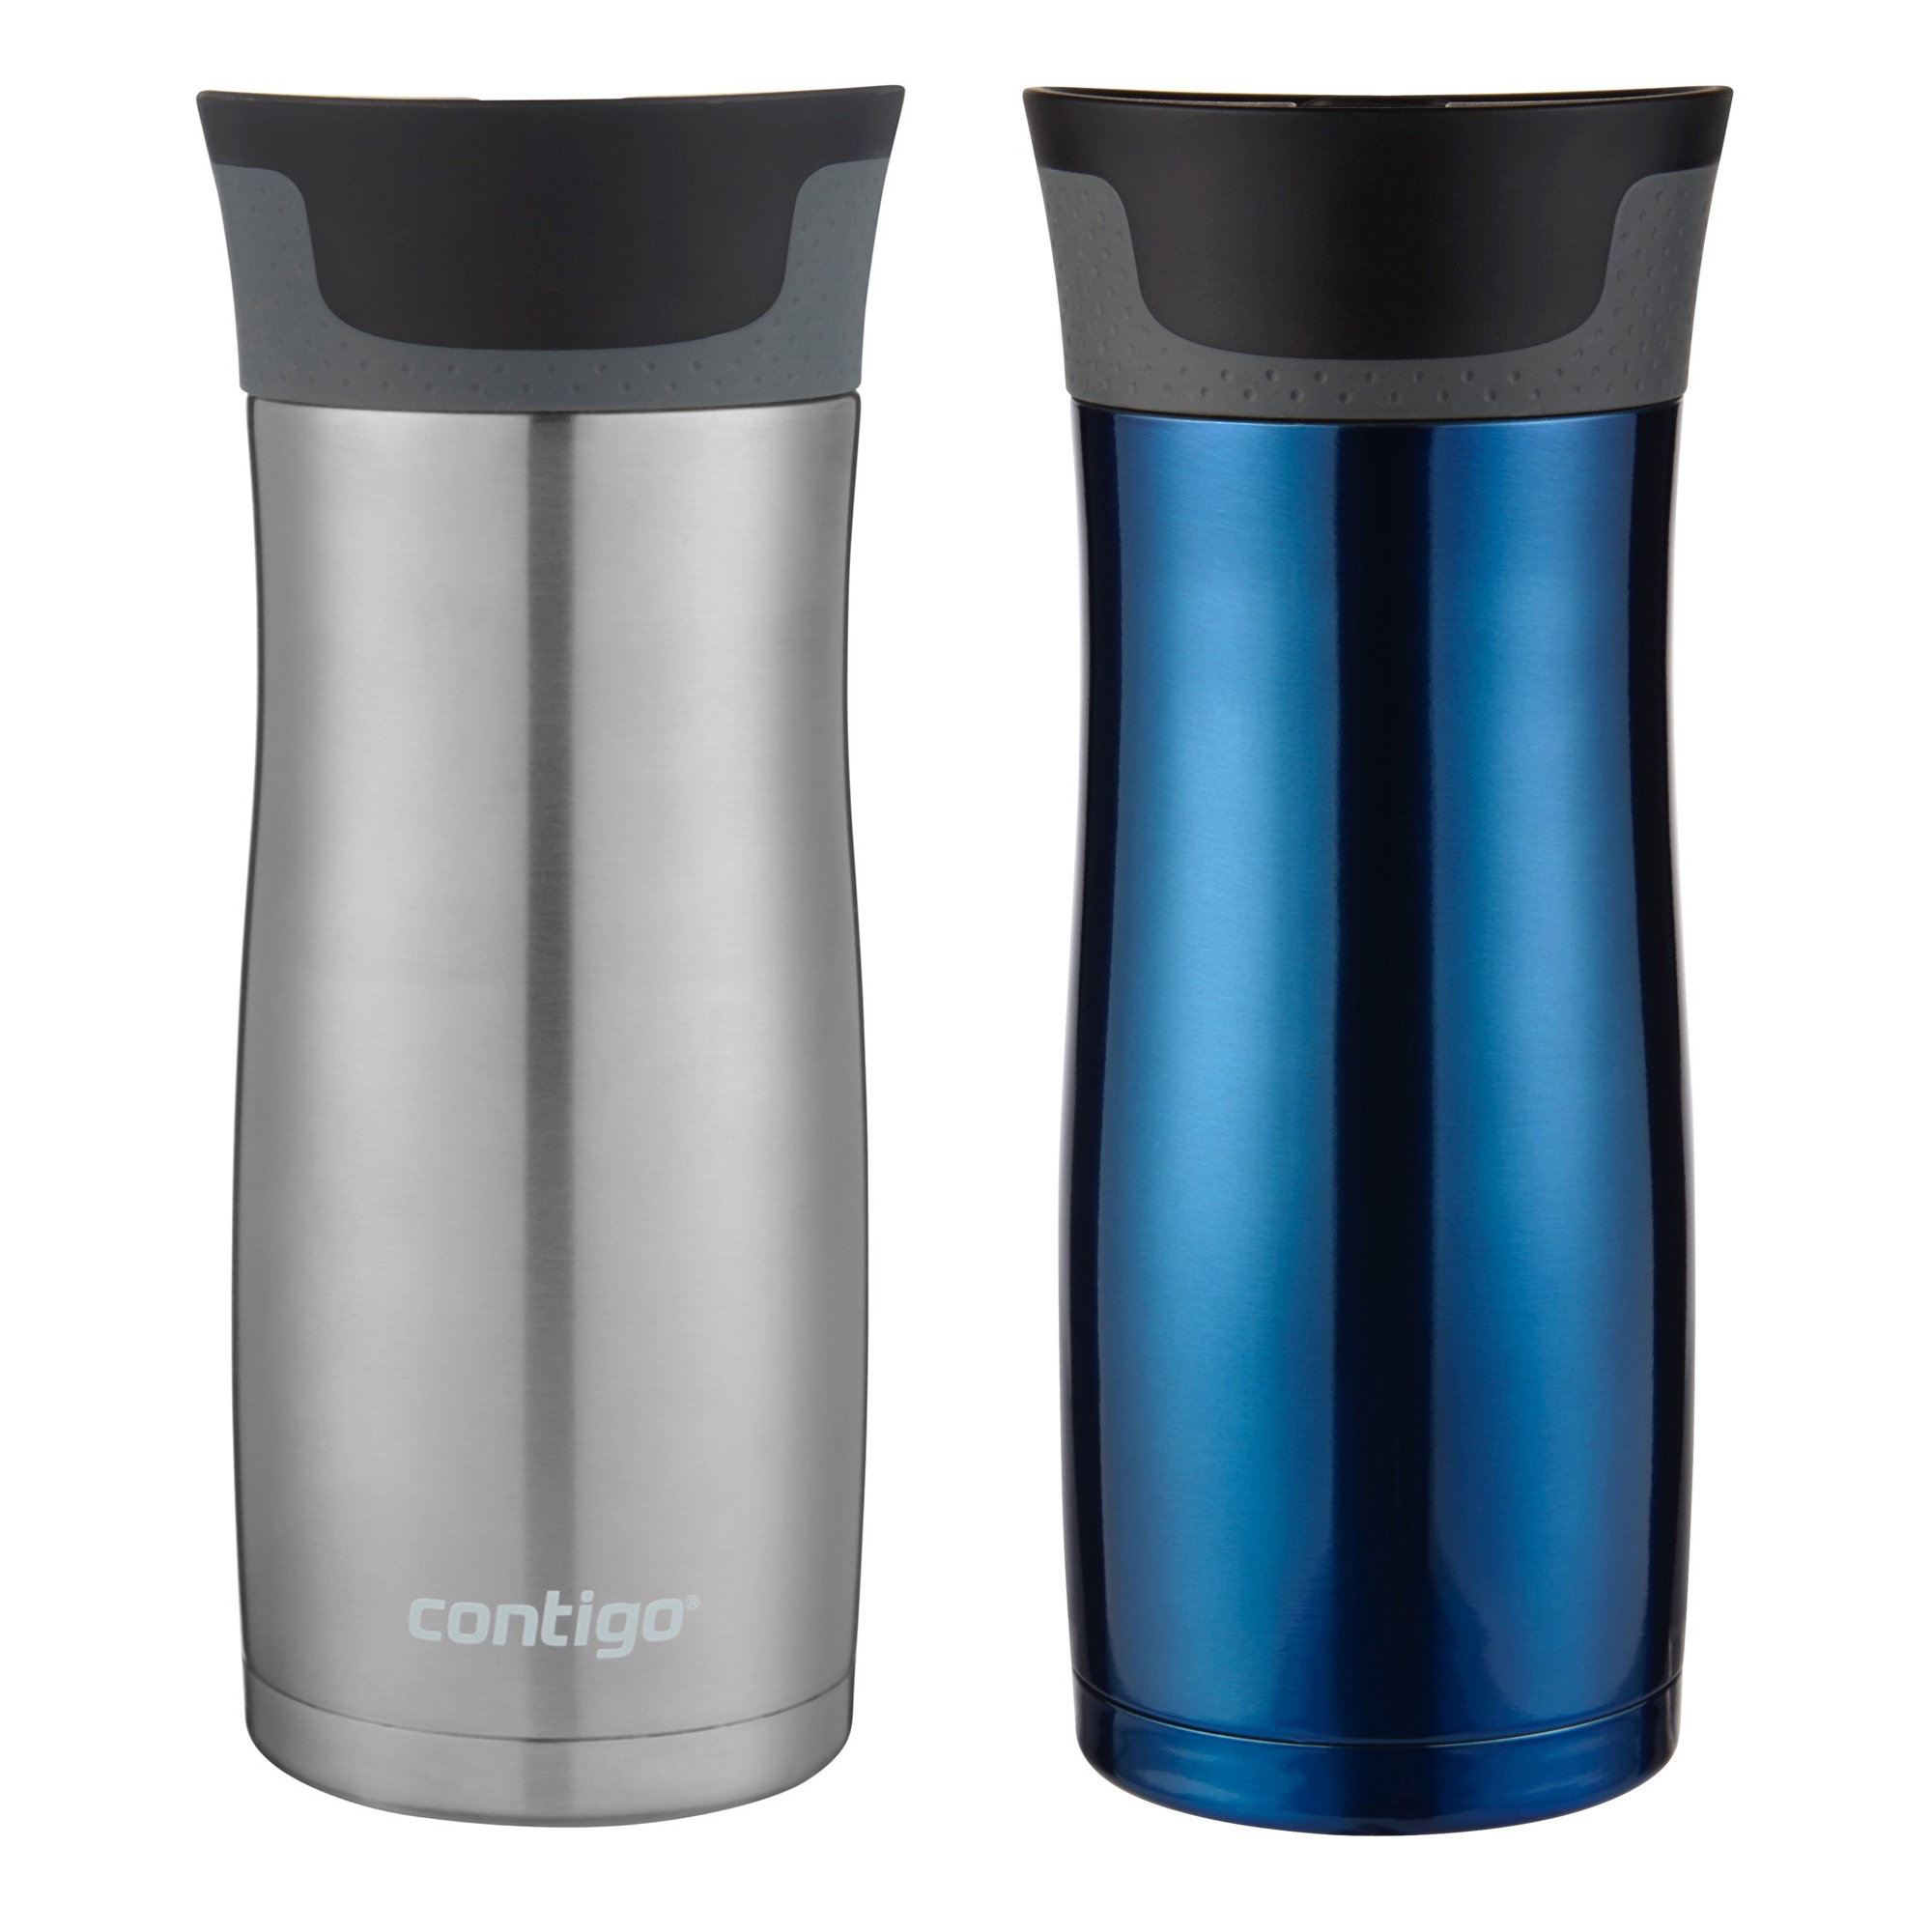 Contigo Autoseal West Loop Vacuum-insulated Stainless Steel Travel Mug with Easy-clean Lid, 16 Oz., Monaco & Stainless Steel, 2-Pack - image 5 of 8